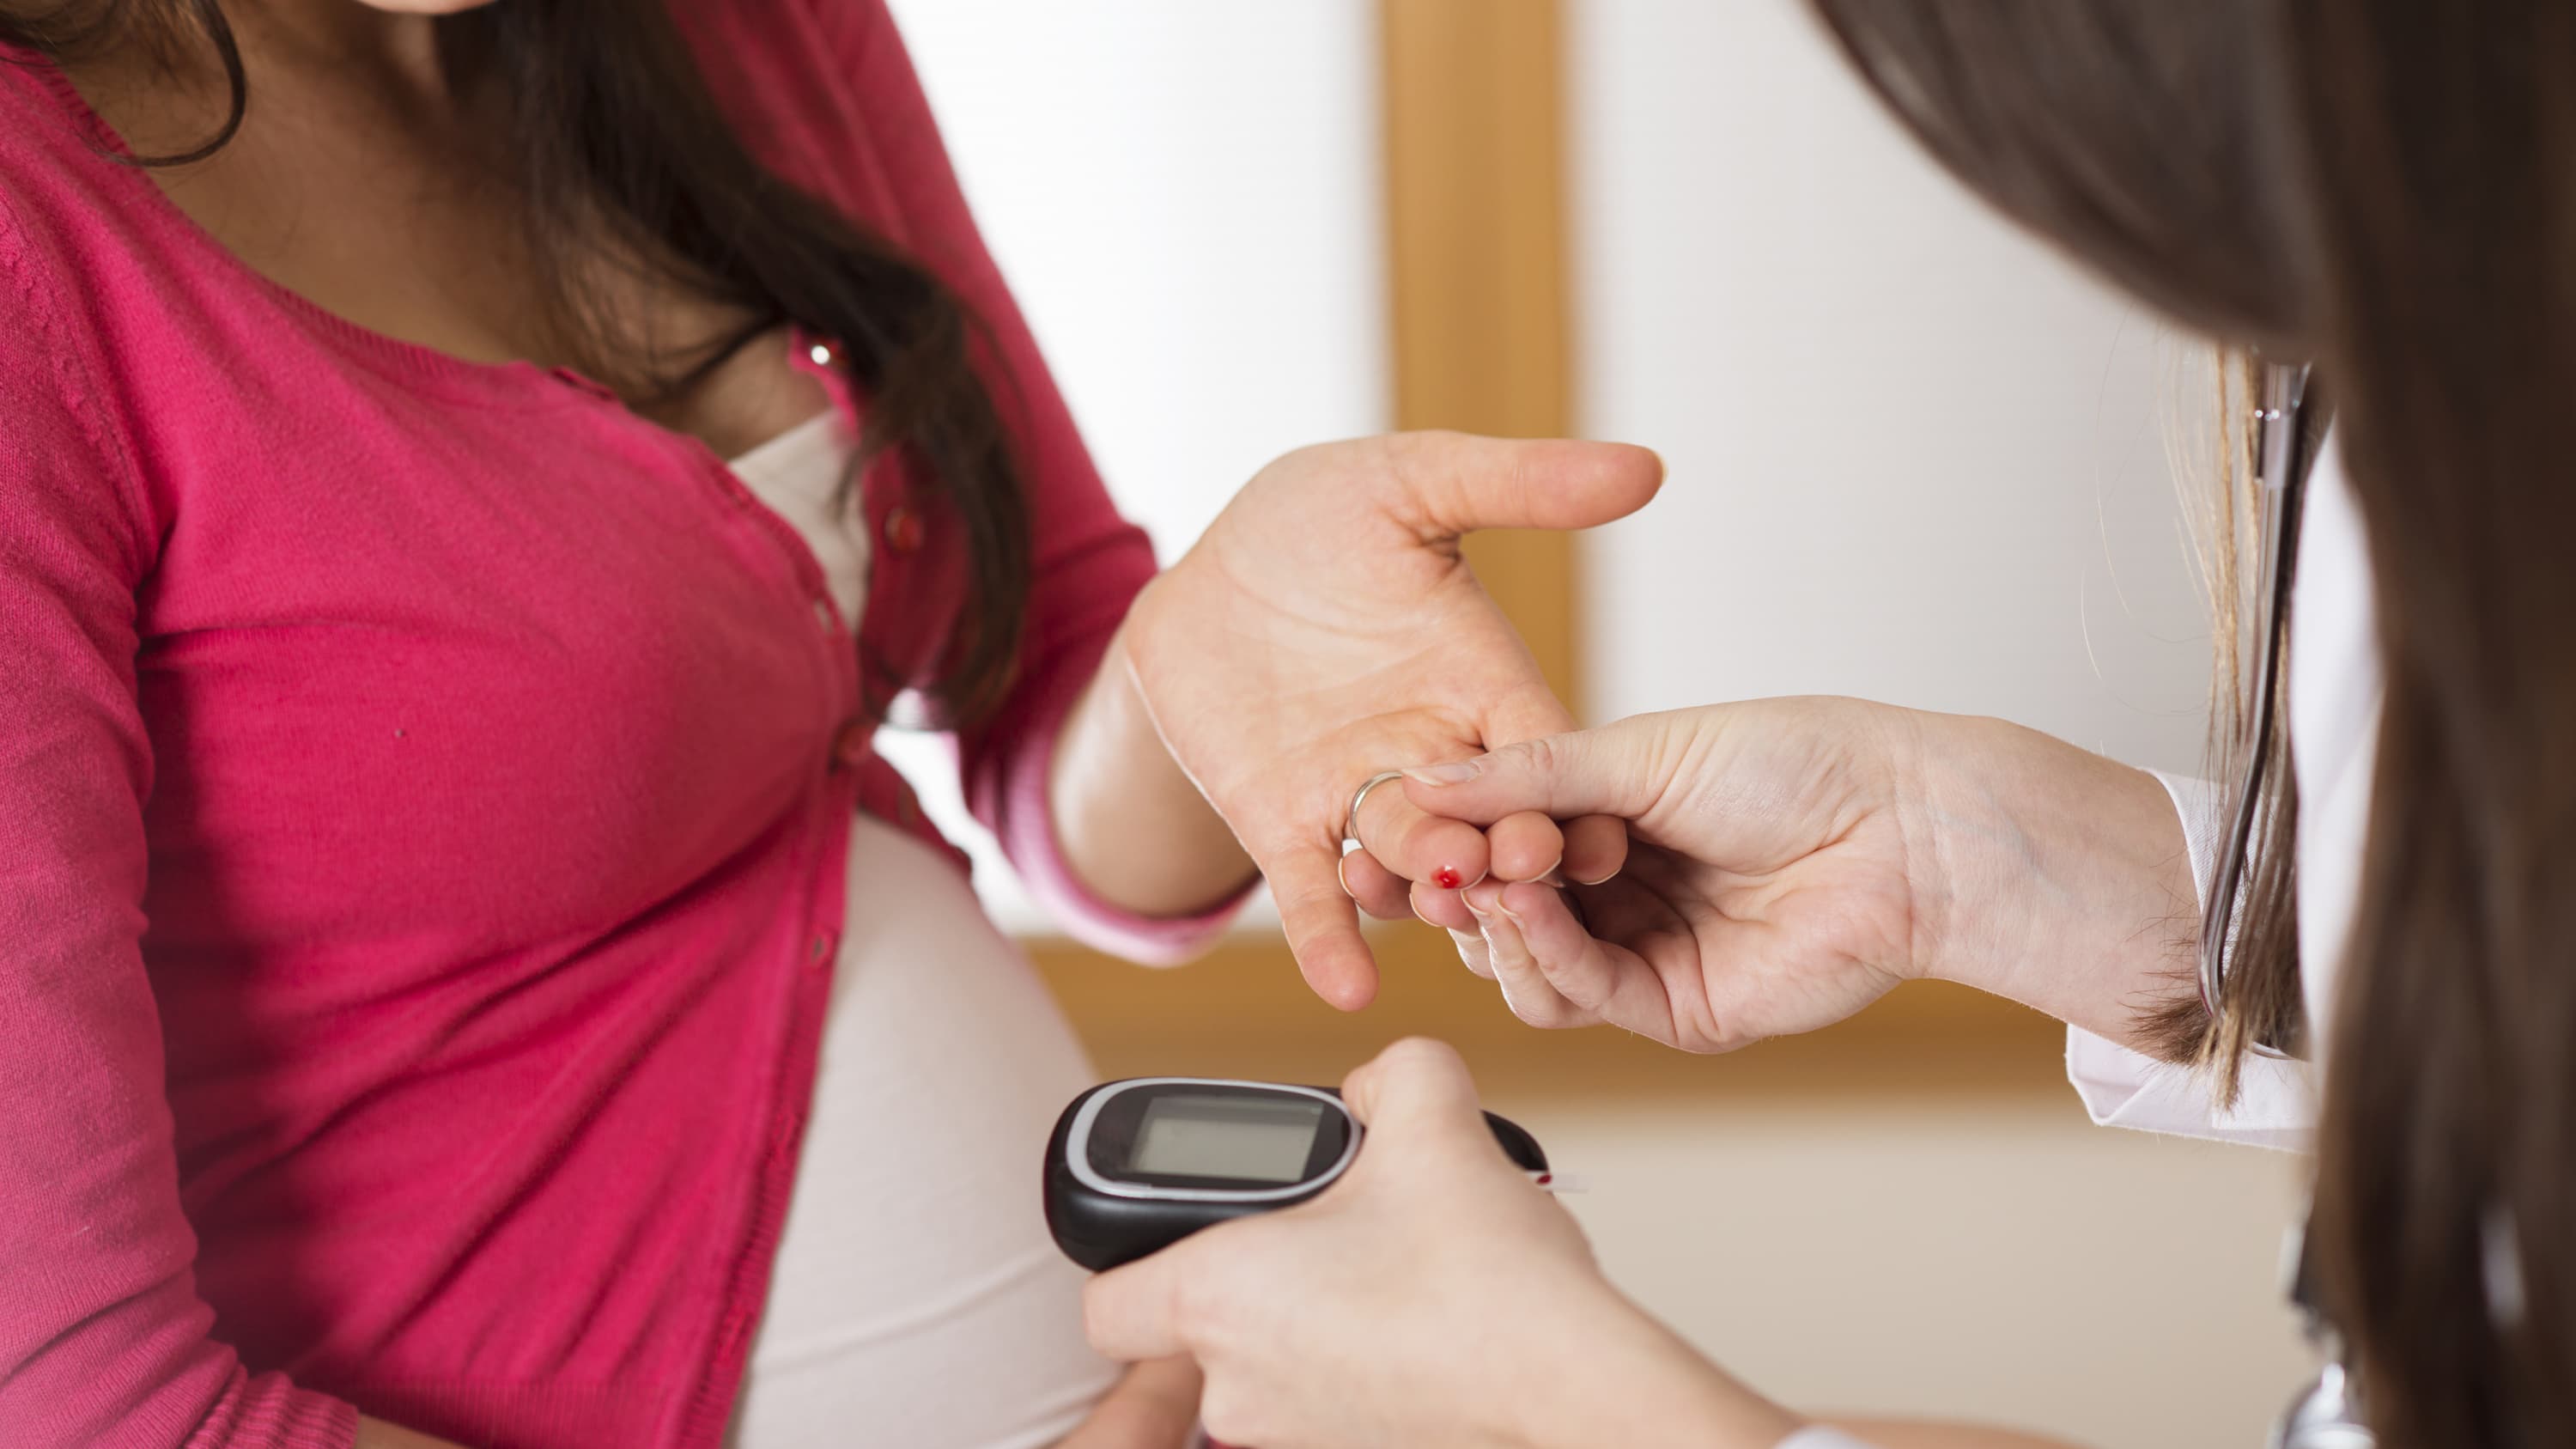 A woman's blood-sugar levels are checked for gestational diabetes